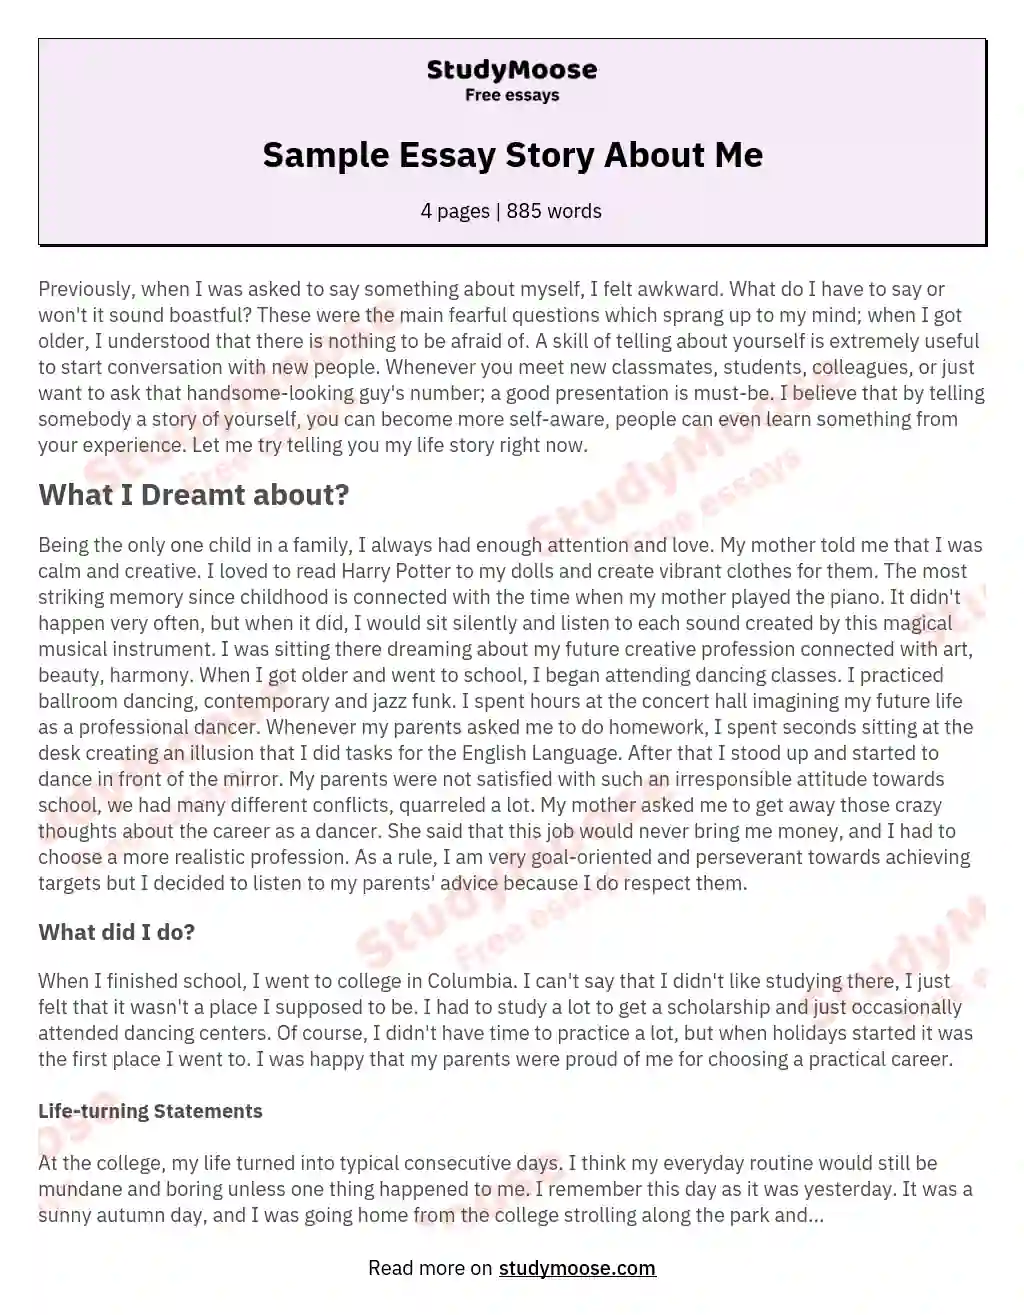 Sample Essay Story About Me essay